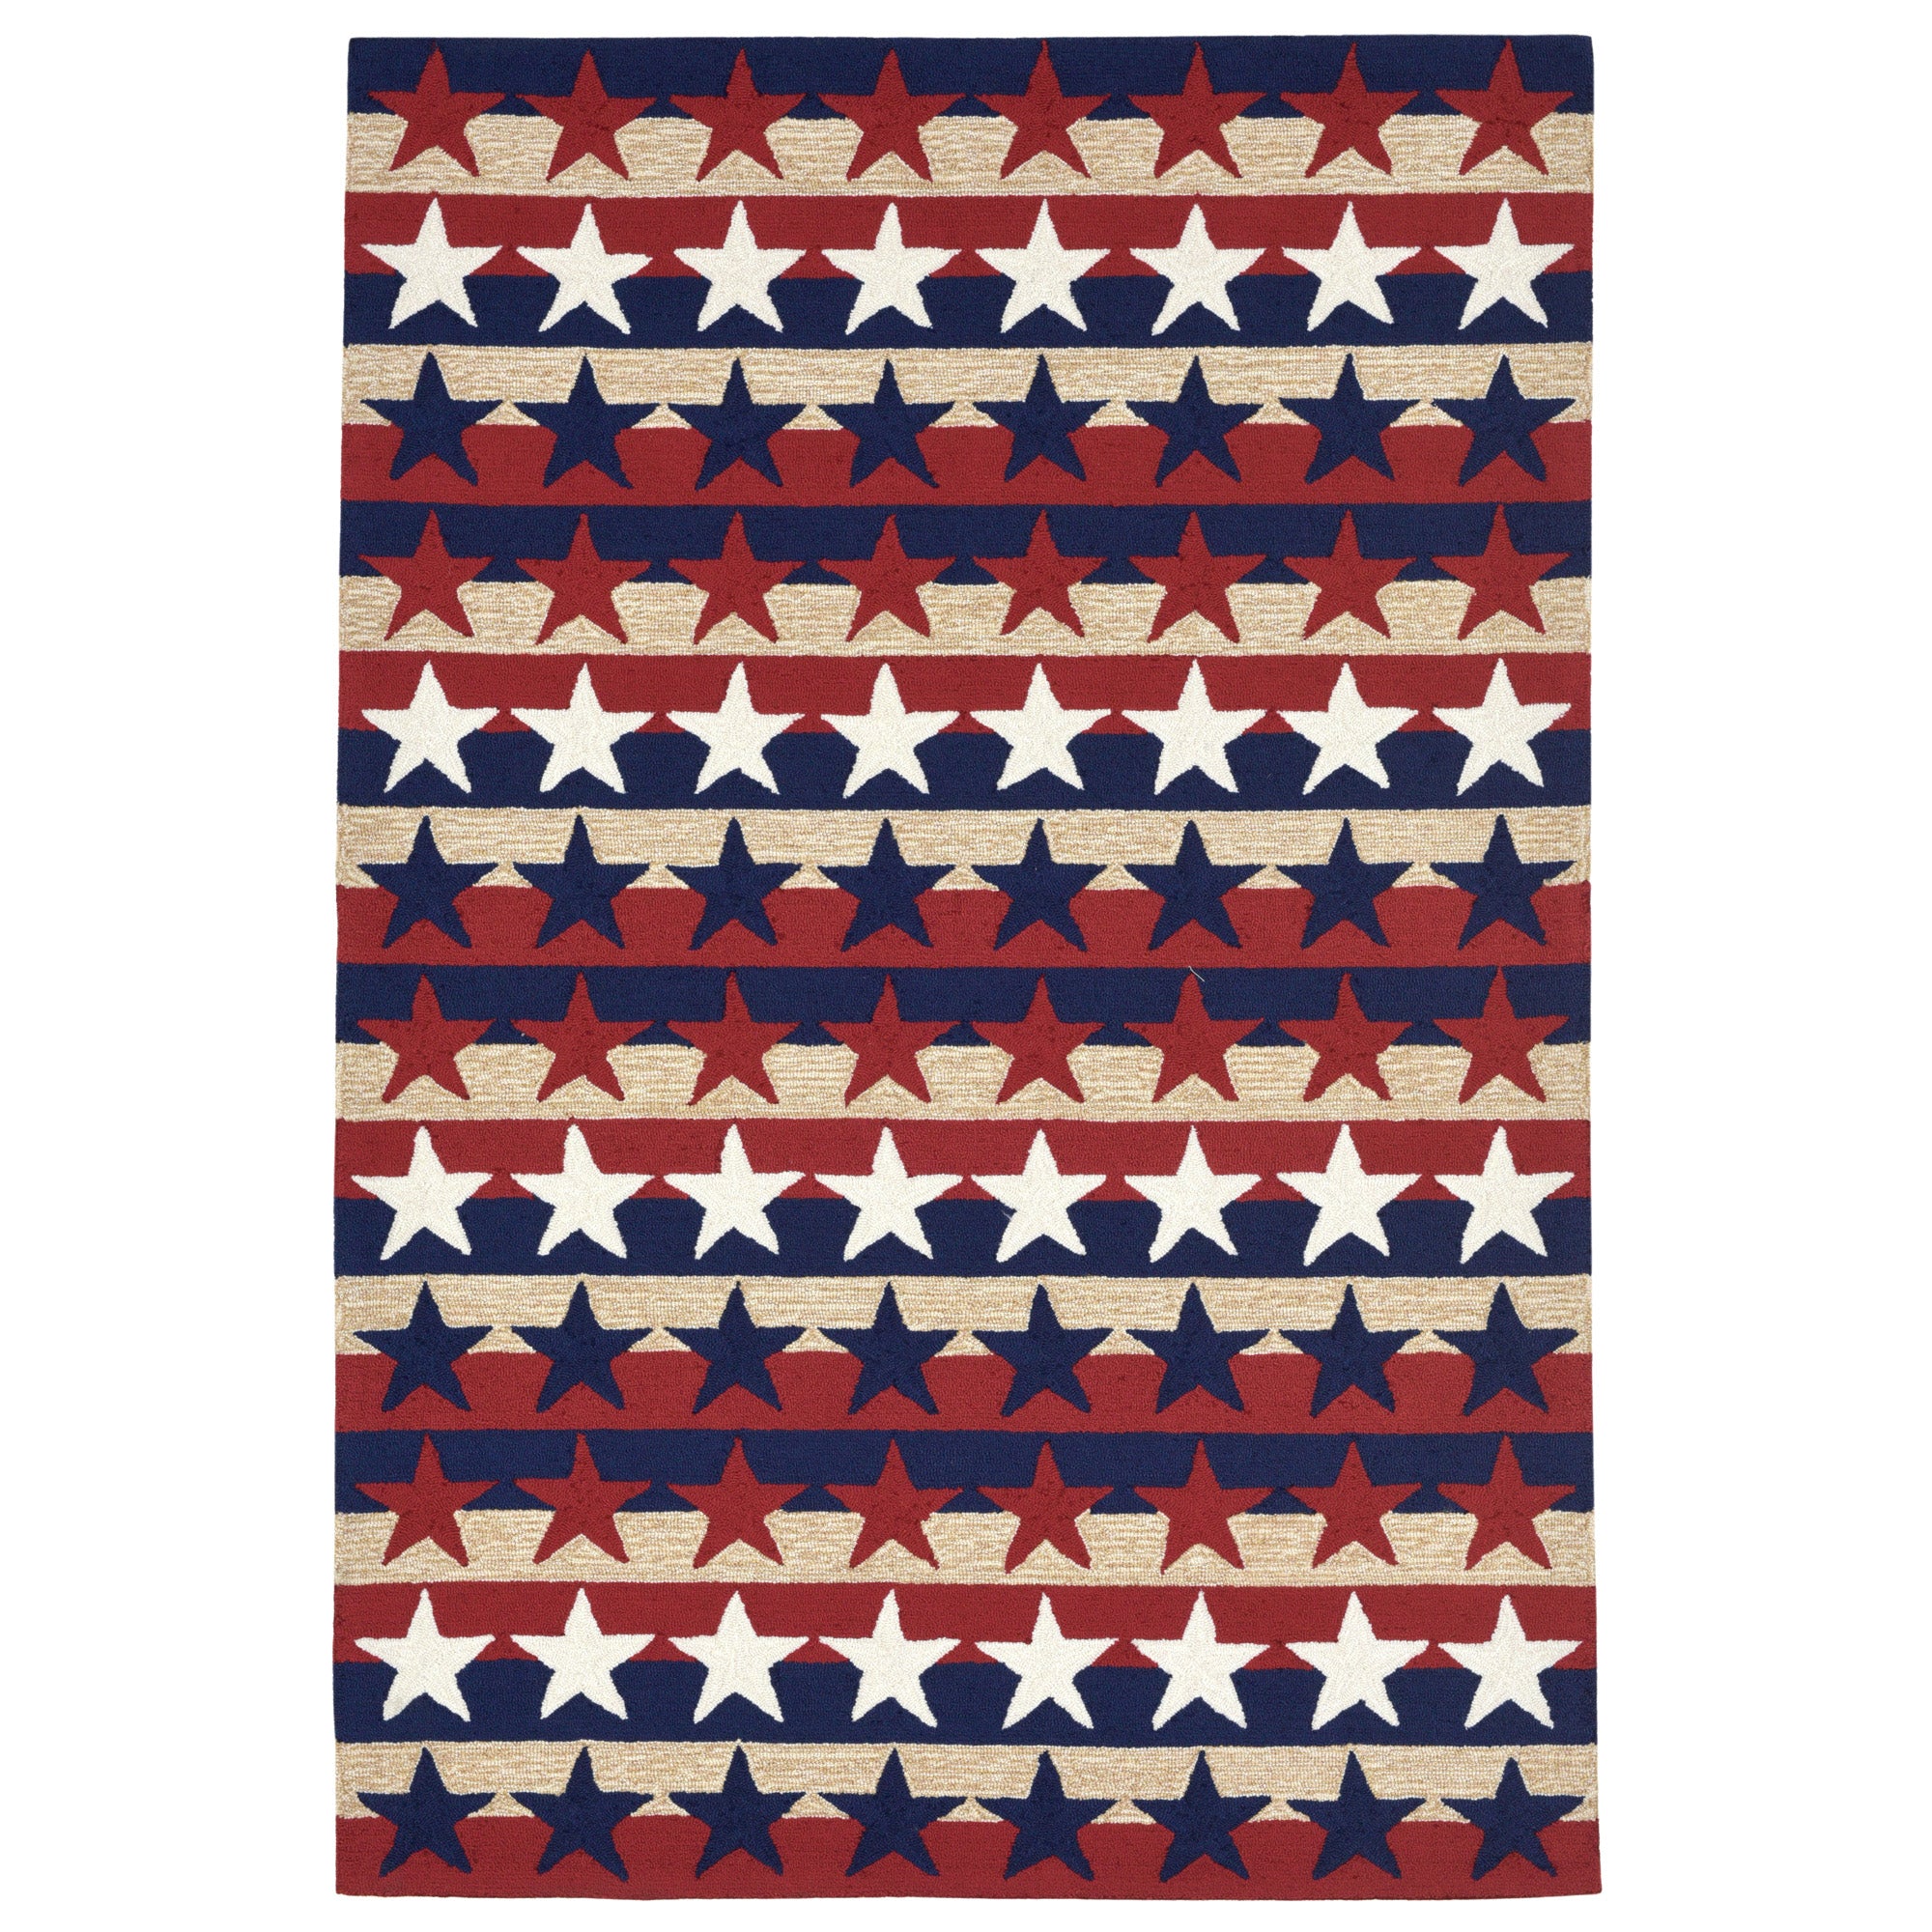 Trans-ocean Imports Ftp46180414 Liora Manne Frontporch Stars & Stripes Indoor/outdoor Rug Red 42"x66"